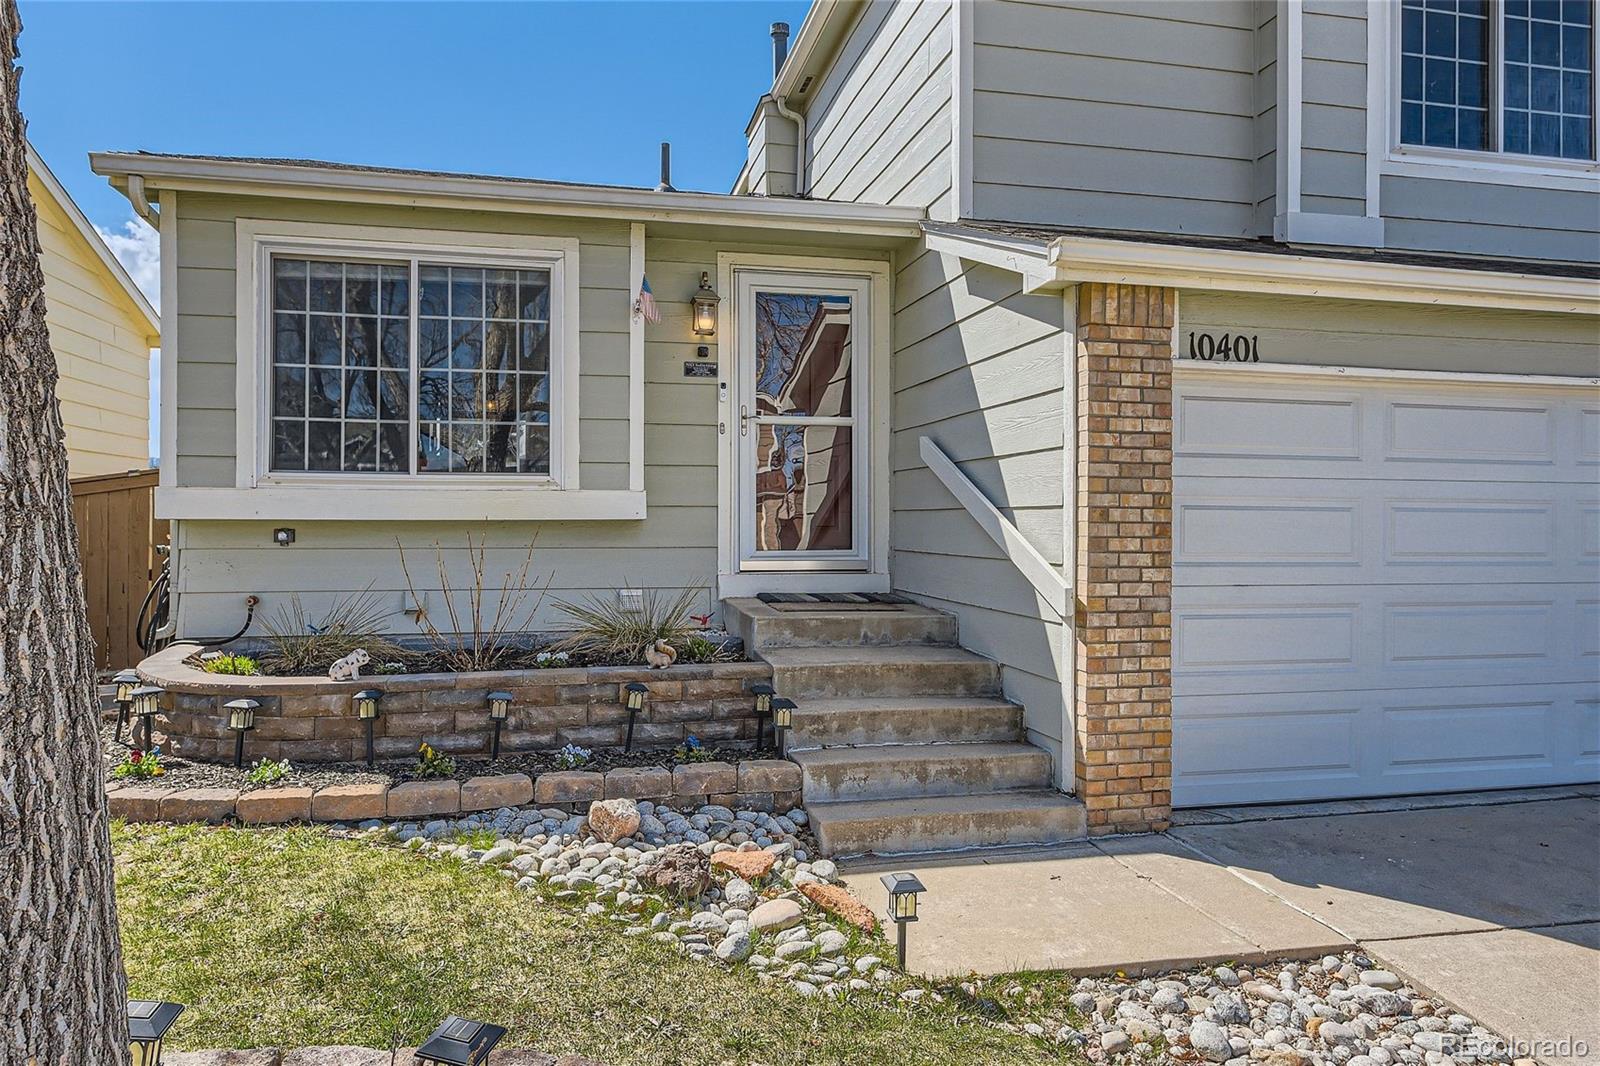 10401  hyacinth street, highlands ranch sold home. Closed on 2024-05-06 for $625,000.